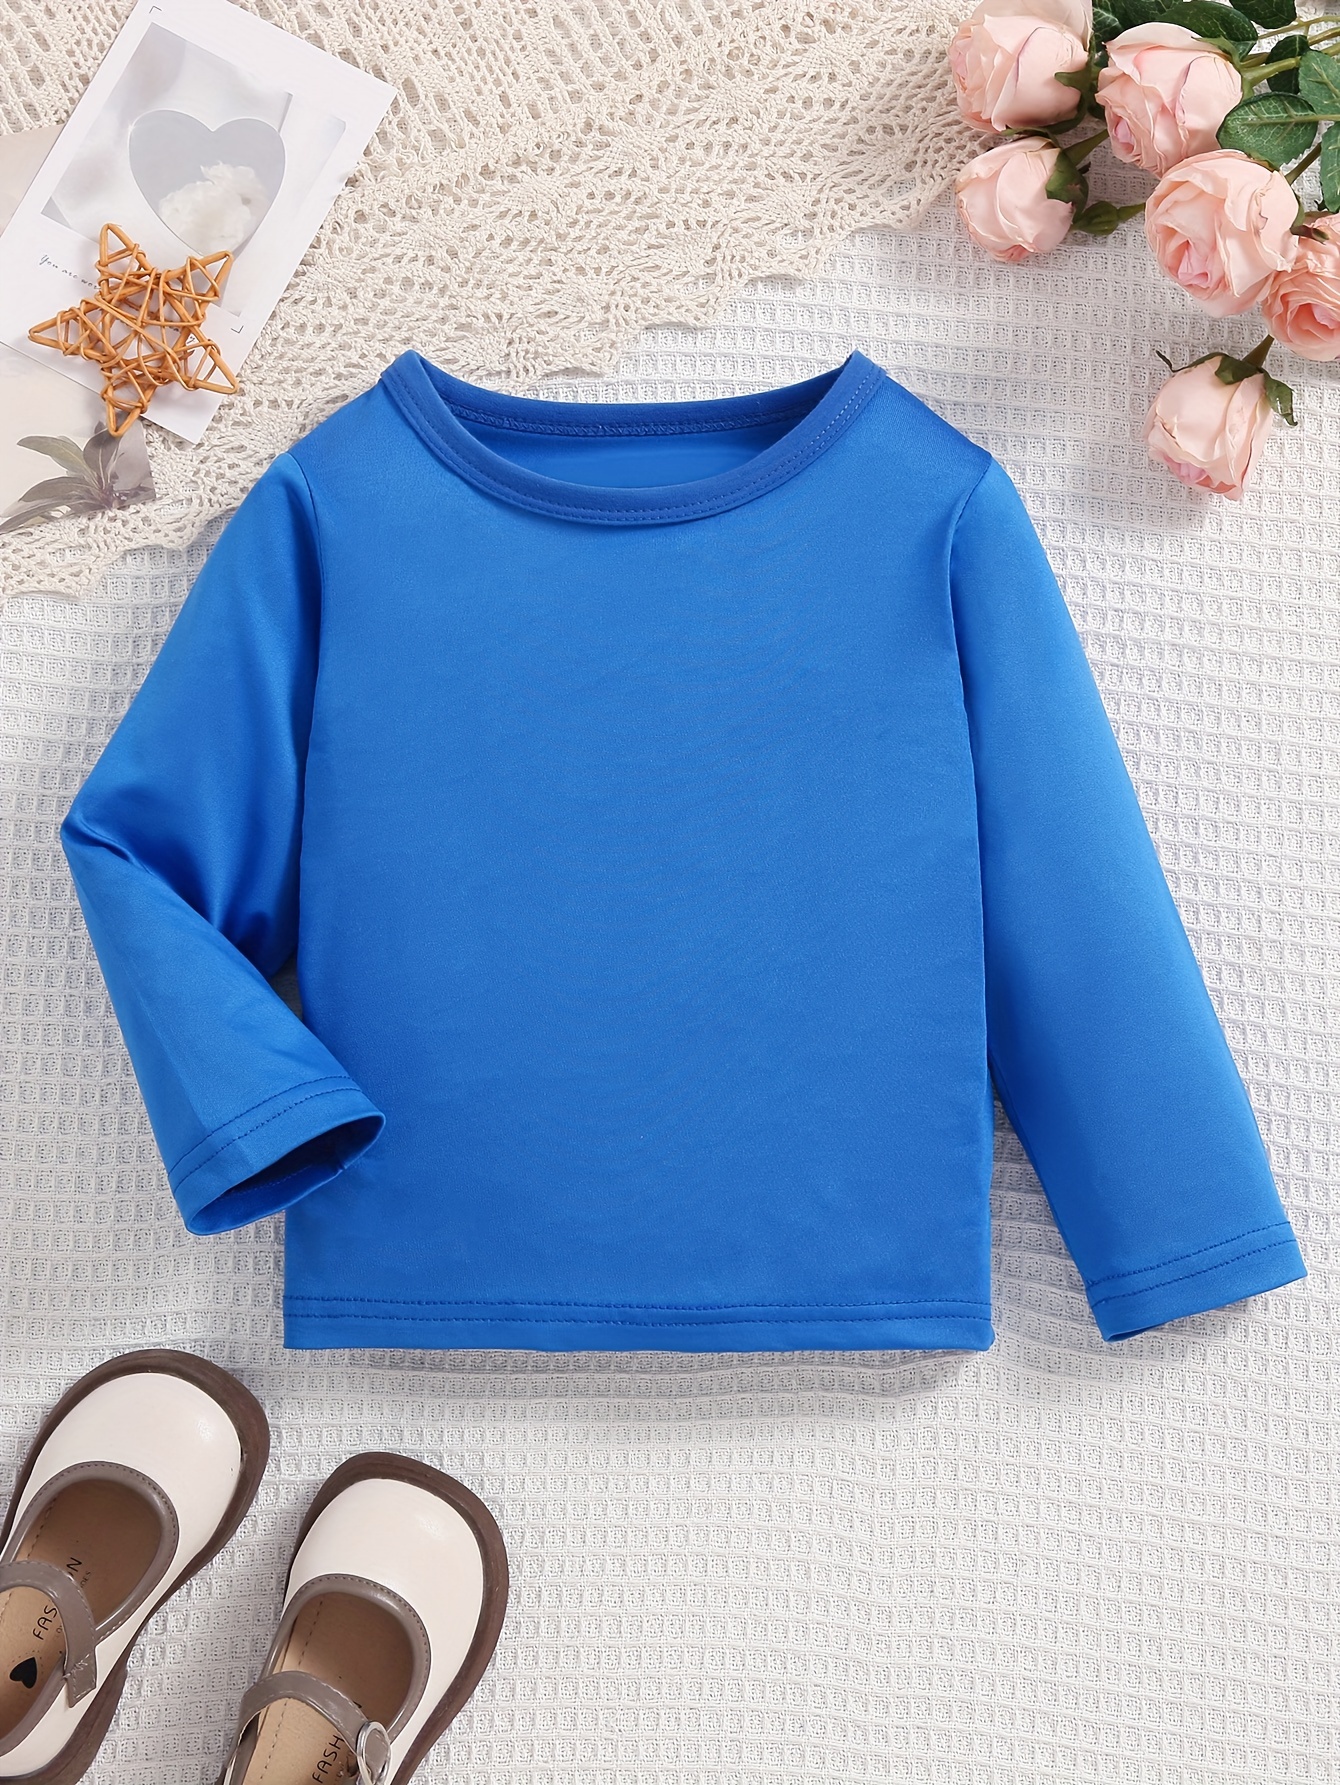 Girls All-match Solid Long Sleeve Undershirts, Toddler's Crew Neck Casual  T-shirt Top